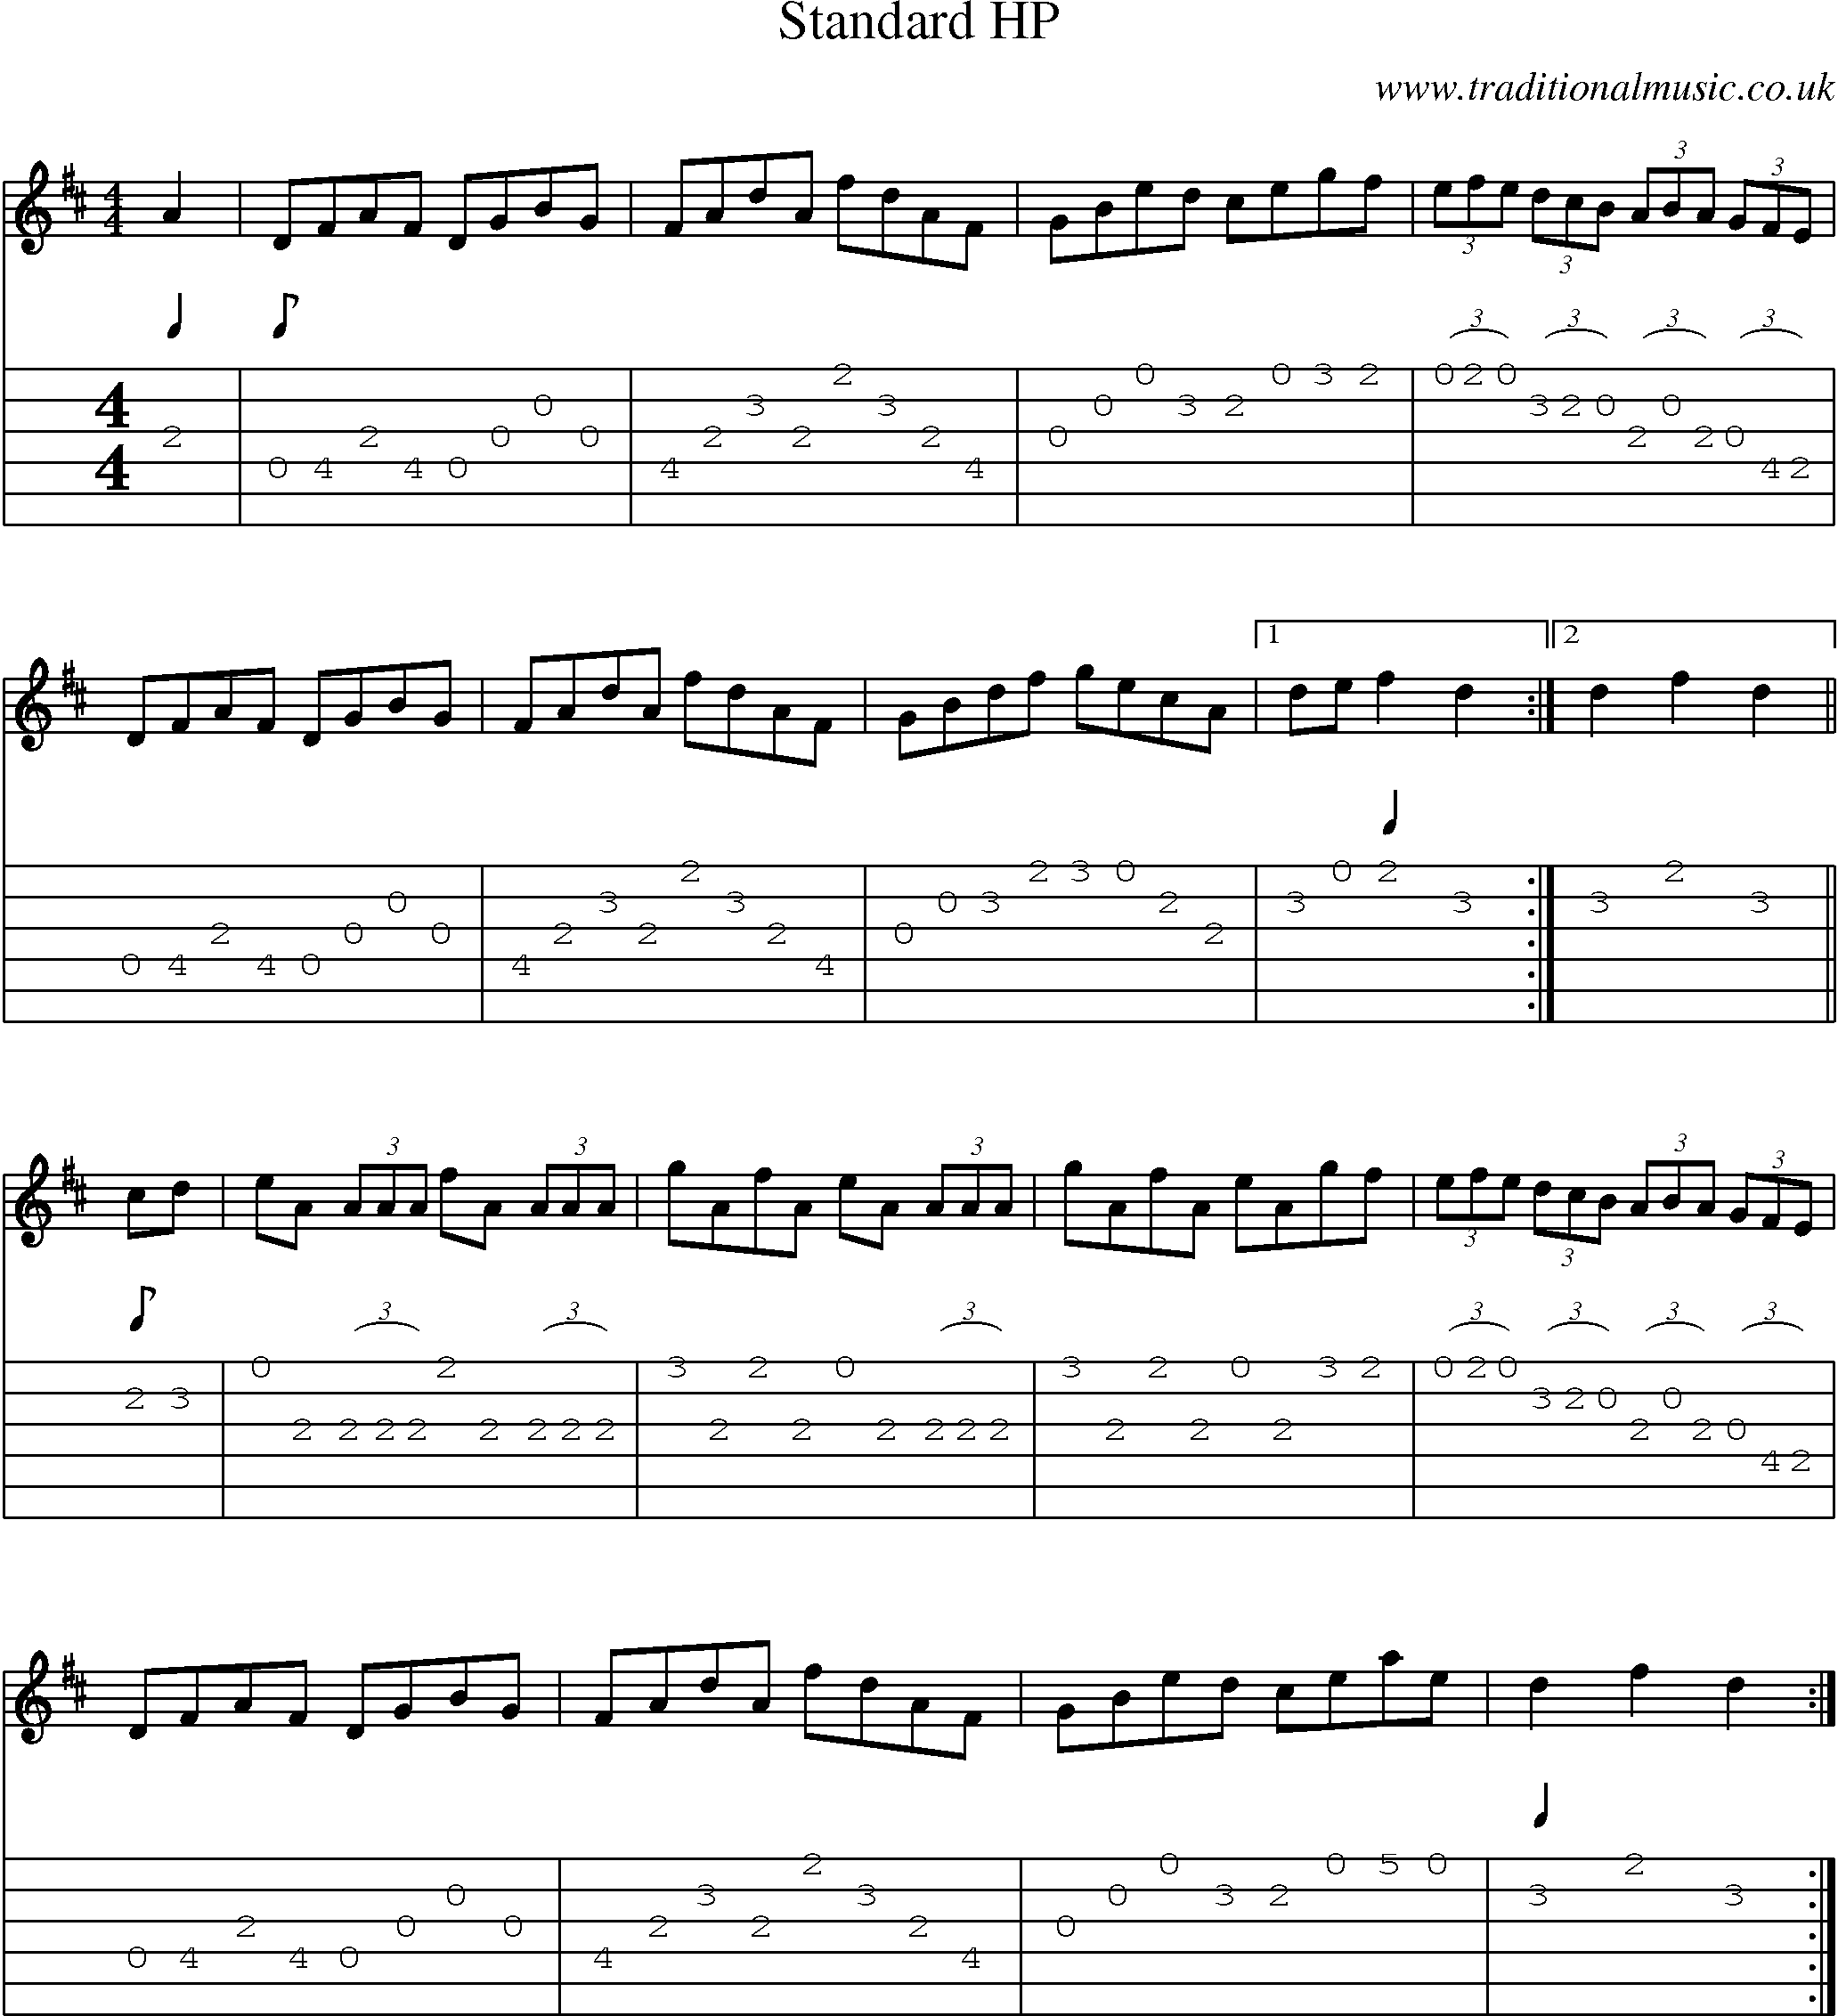 Music Score and Guitar Tabs for Standard